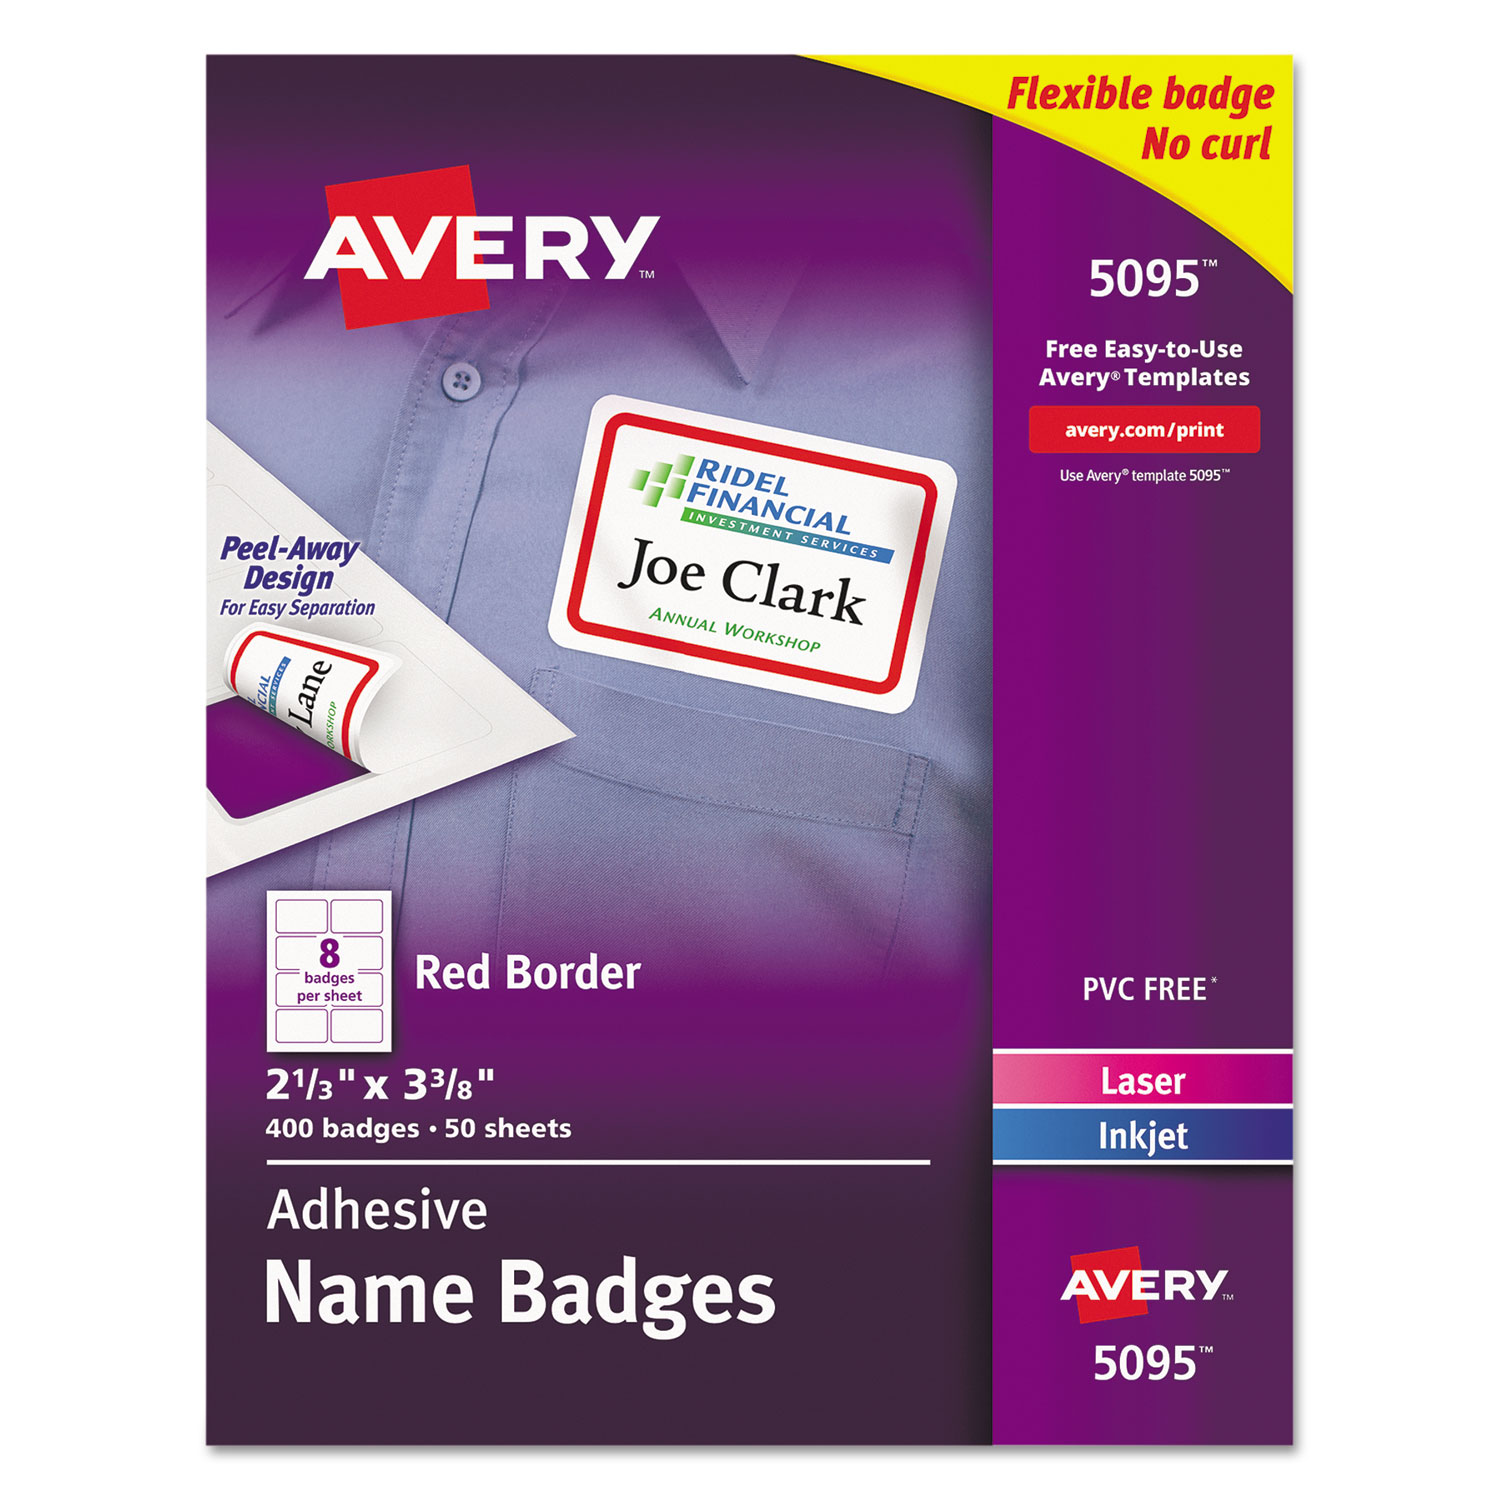  Avery 05095 Flexible Adhesive Name Badge Labels, 3.38 x 2.33, White/Red Border, 400/Box (AVE5095) 